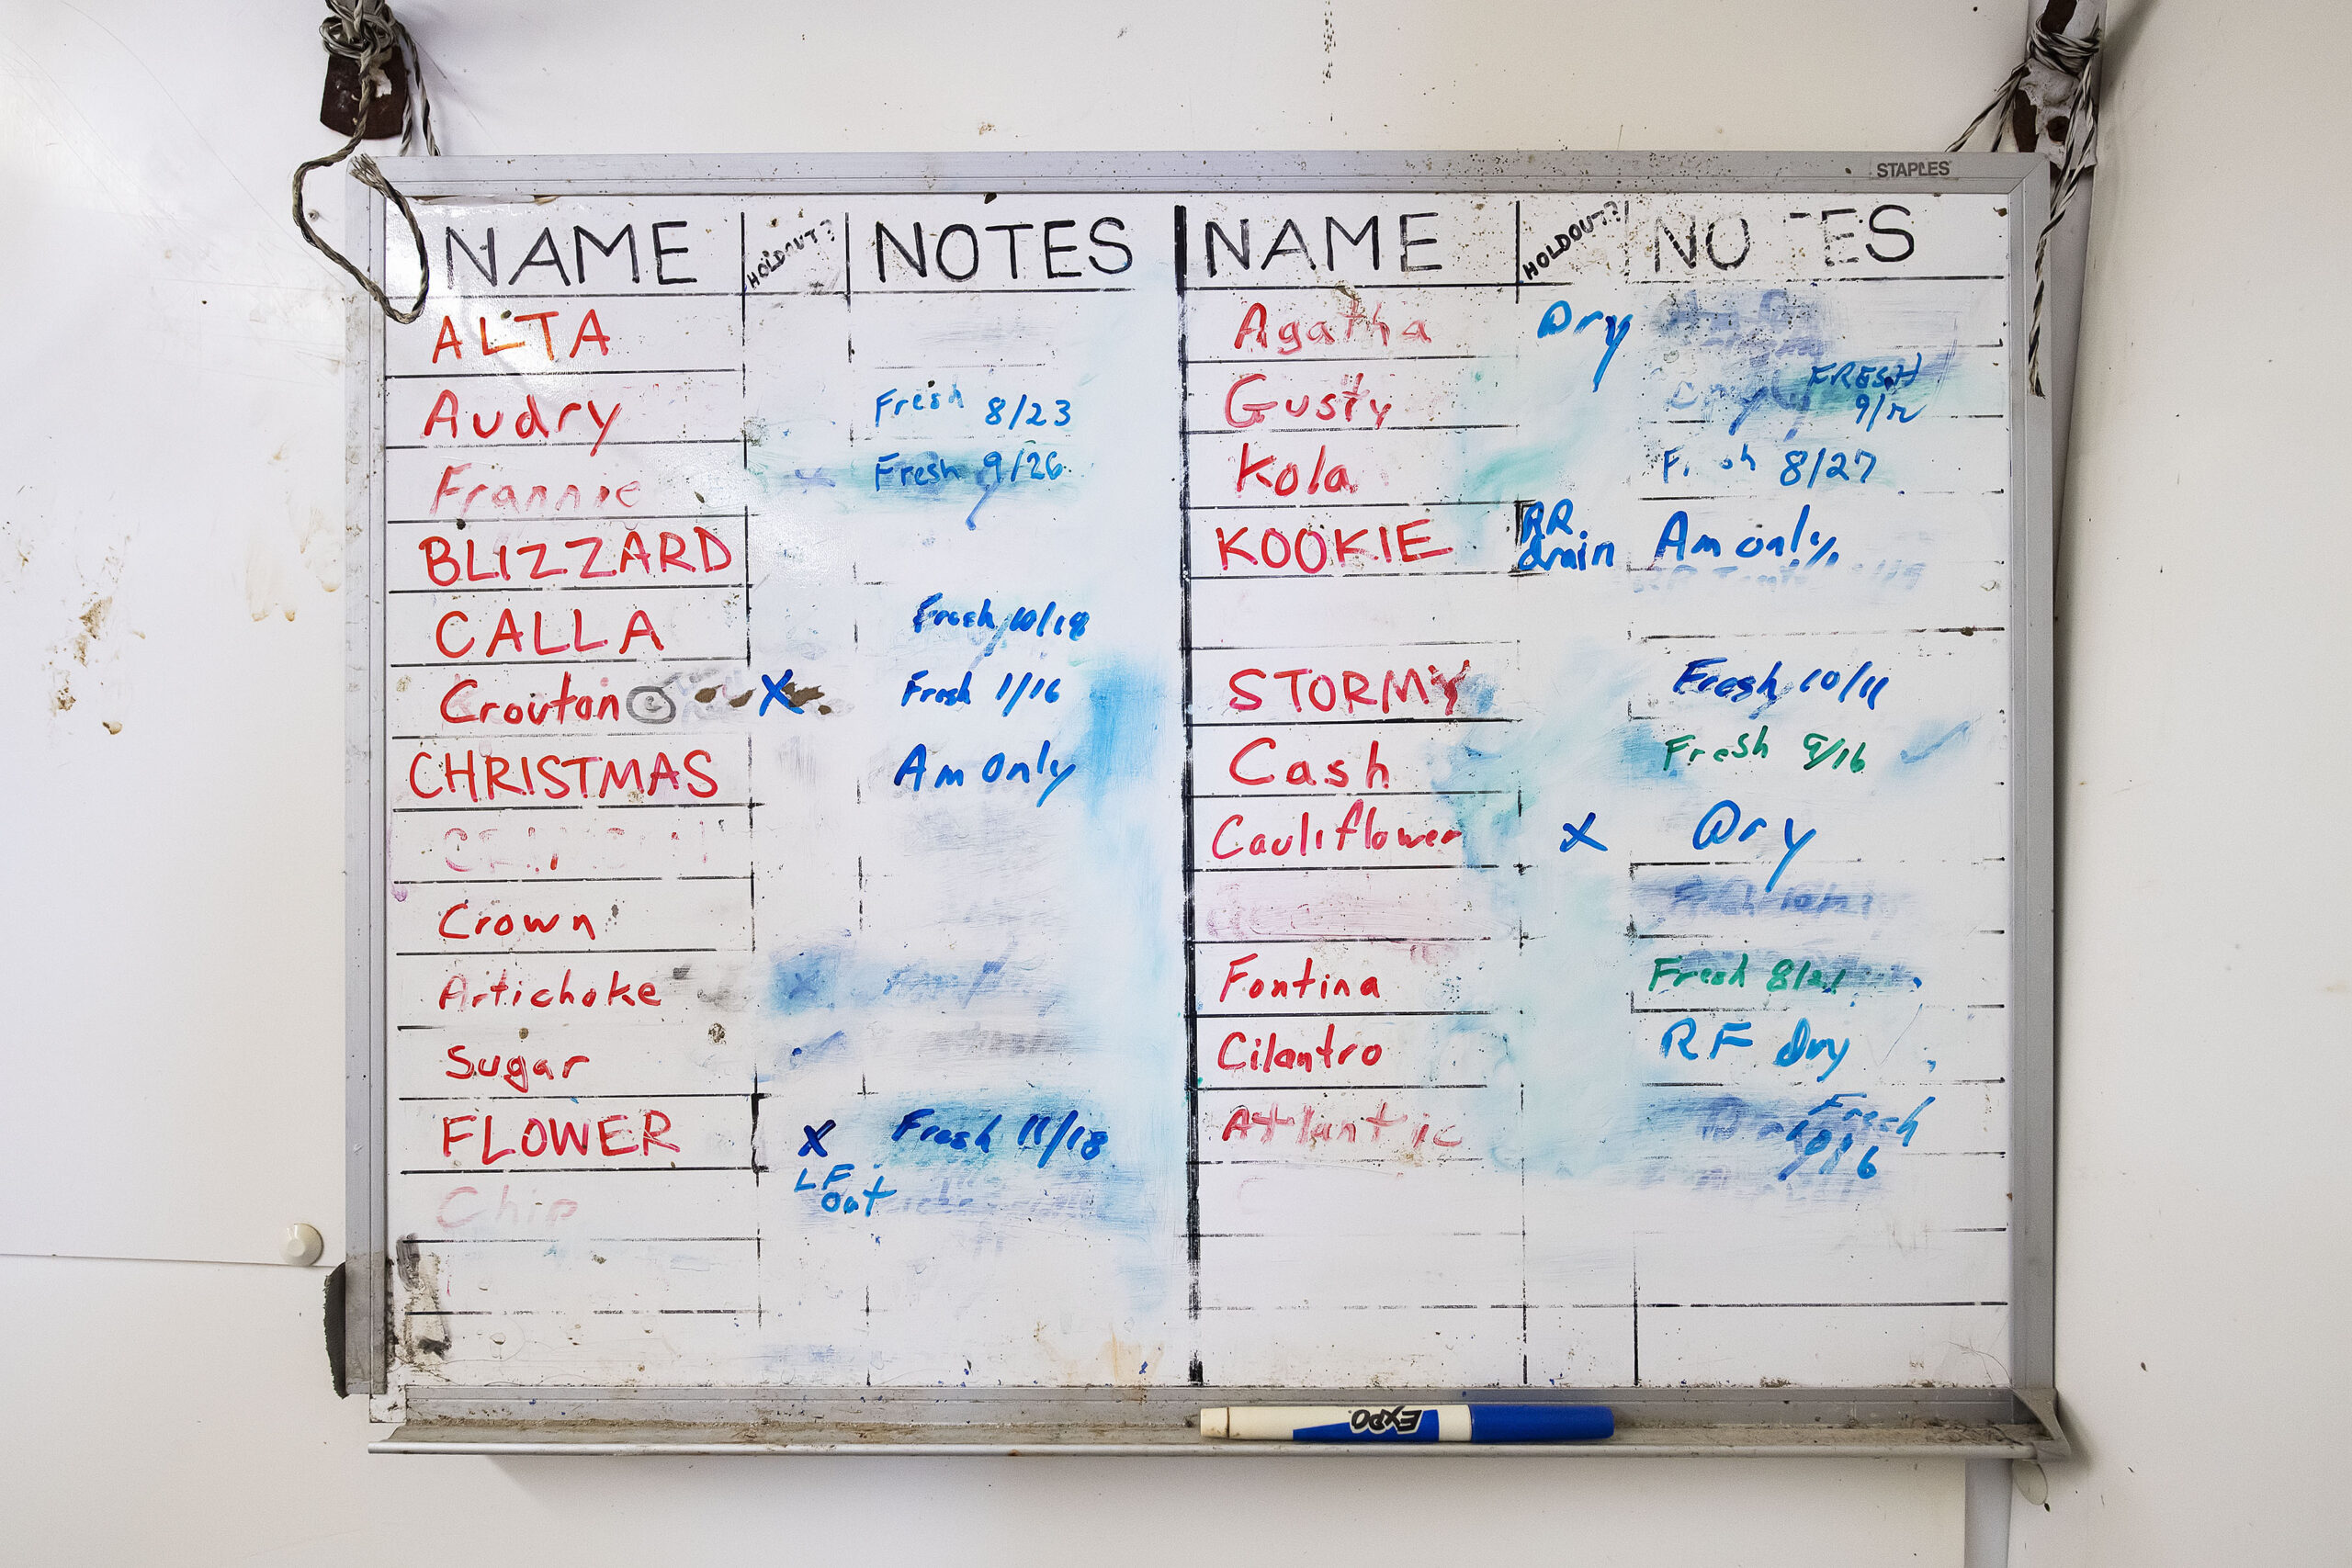 A whiteboard for notes about all the cows inside the milking pen during the afternoon milking of the cows at the Mecox Bay Dairy on March 1st, 2022